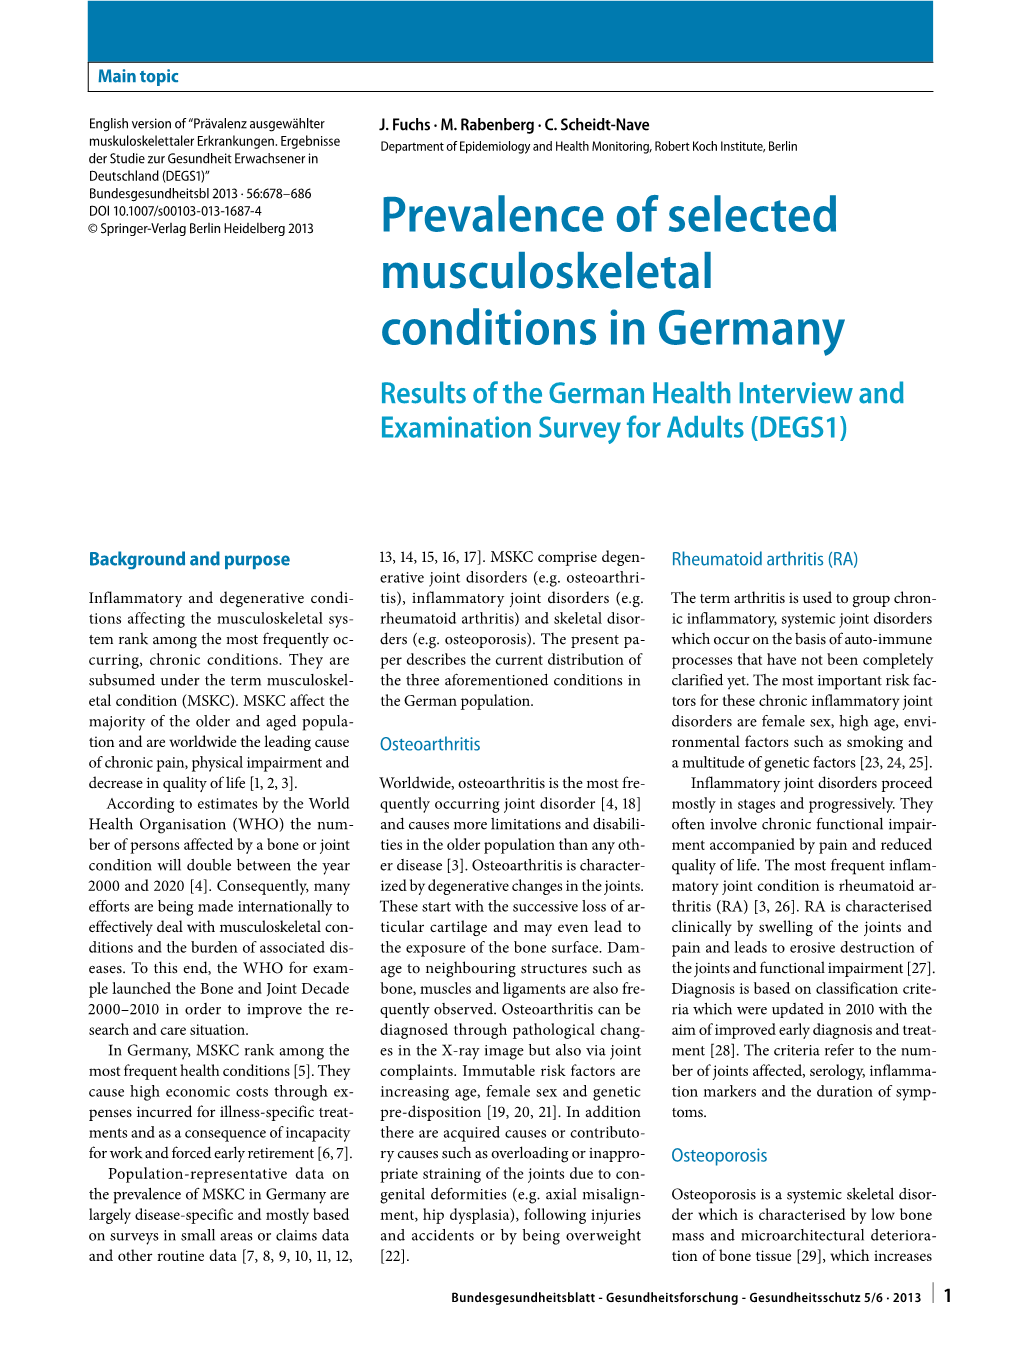 Prevalence of Selected Musculoskeletal Conditions in Germany Results of the German Health Interview and Examination Survey for Adults (DEGS1)